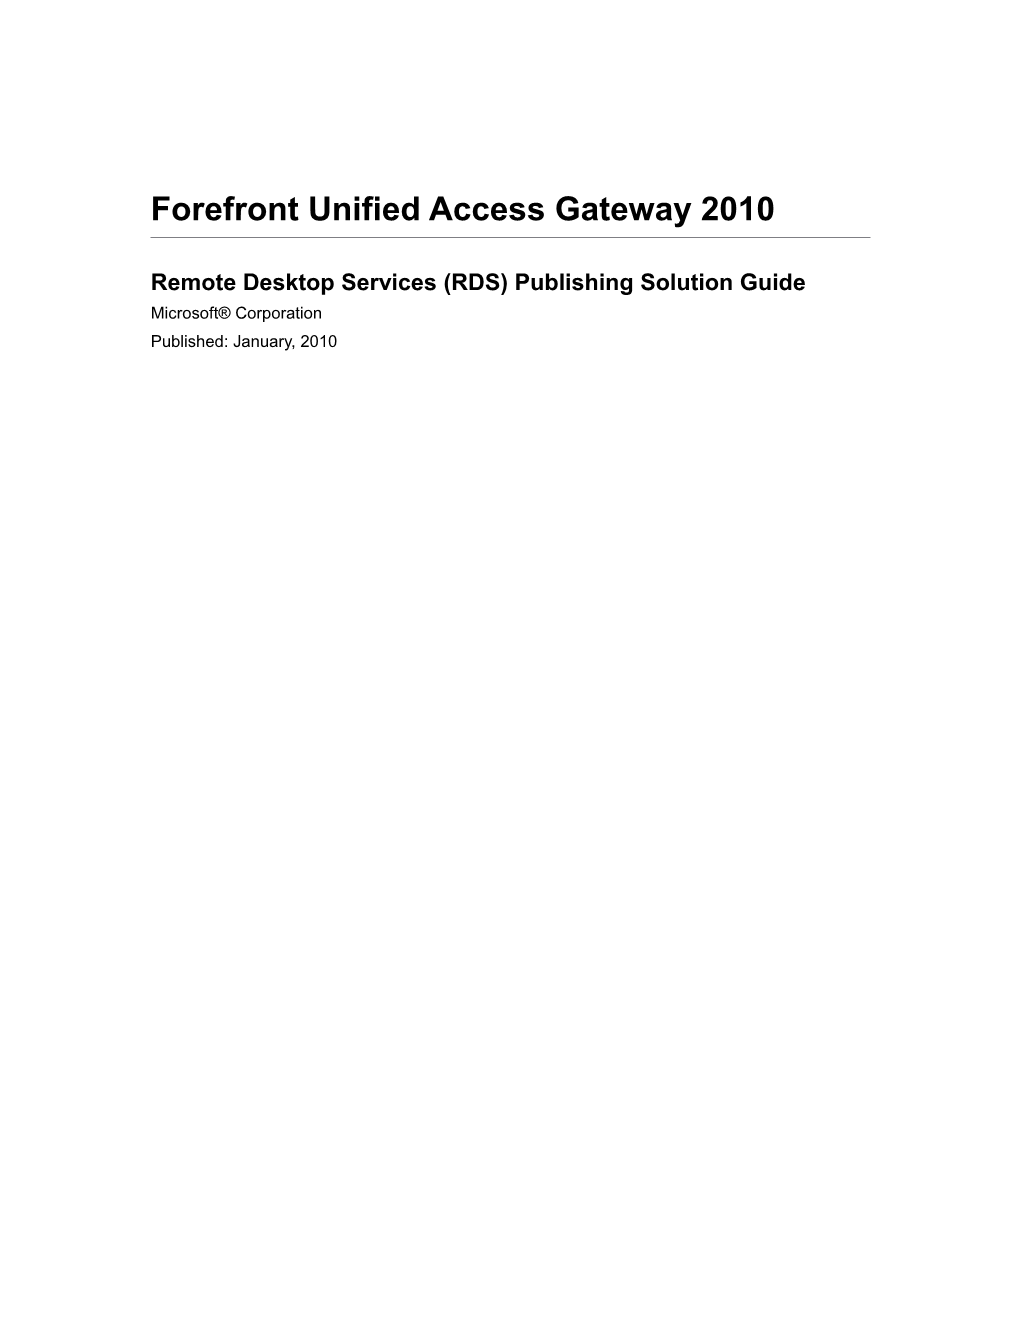 Forefront Unified Access Gateway 2010